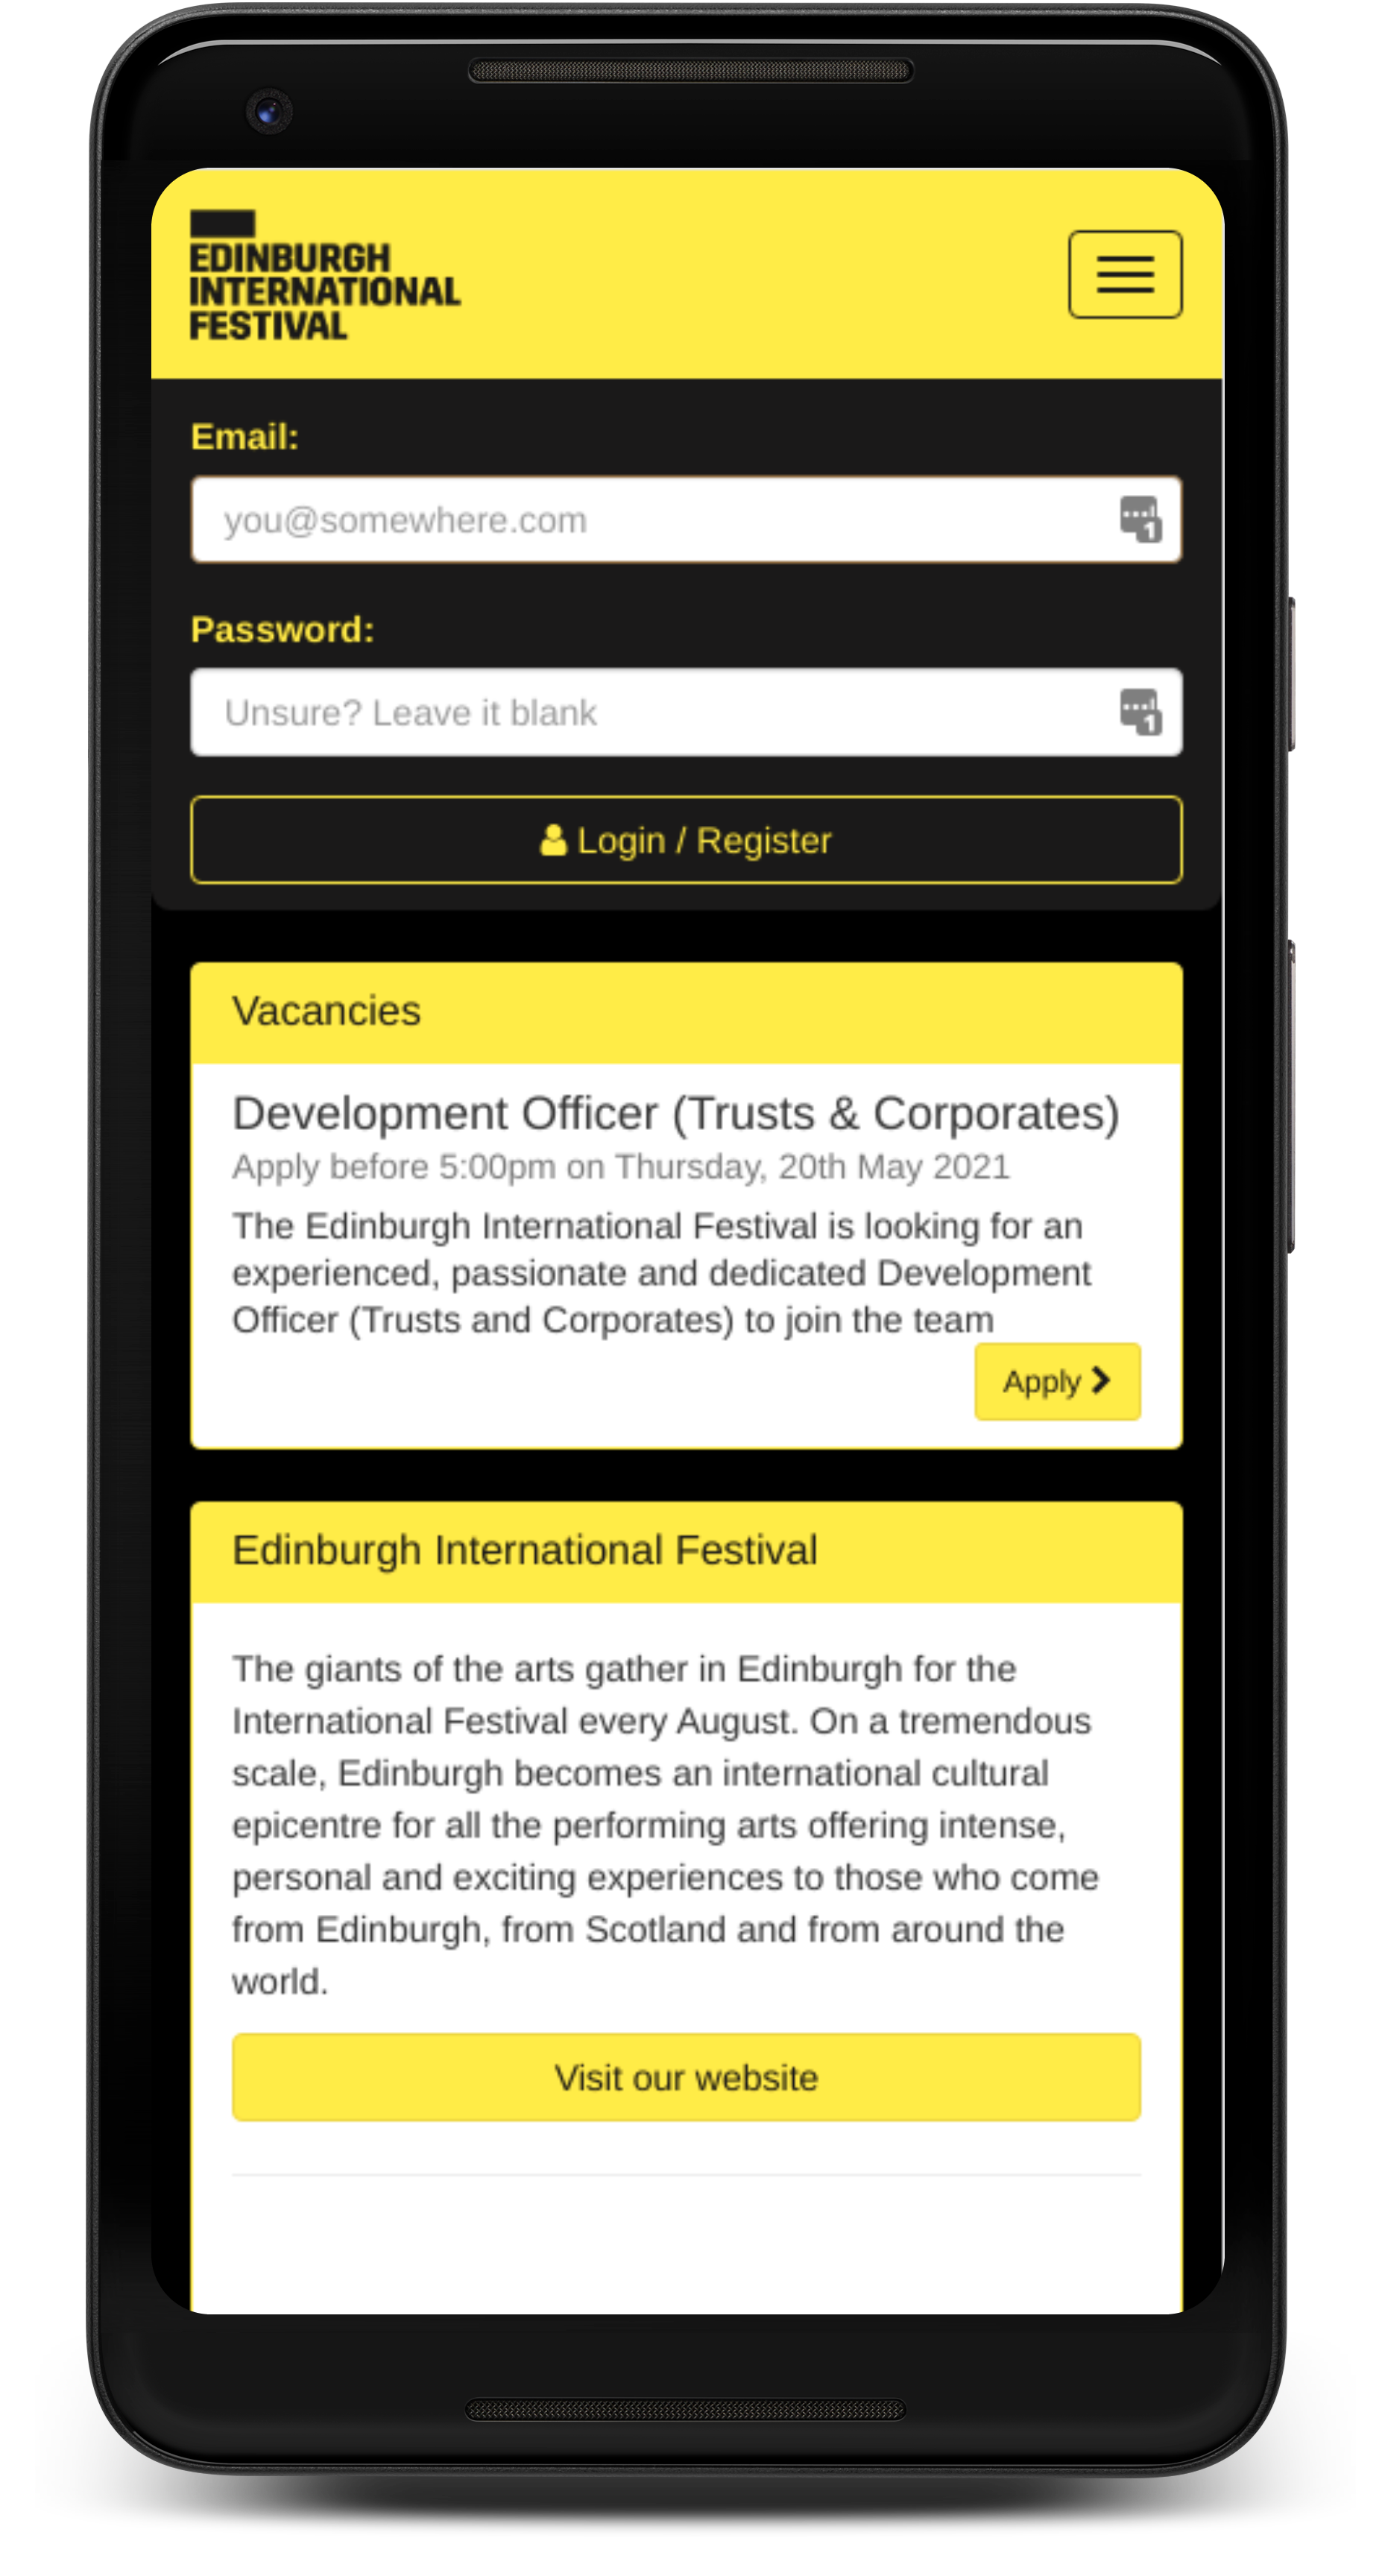 The homepage of Edinburgh International Festival's teamdetails site displayed on a mobile phone.